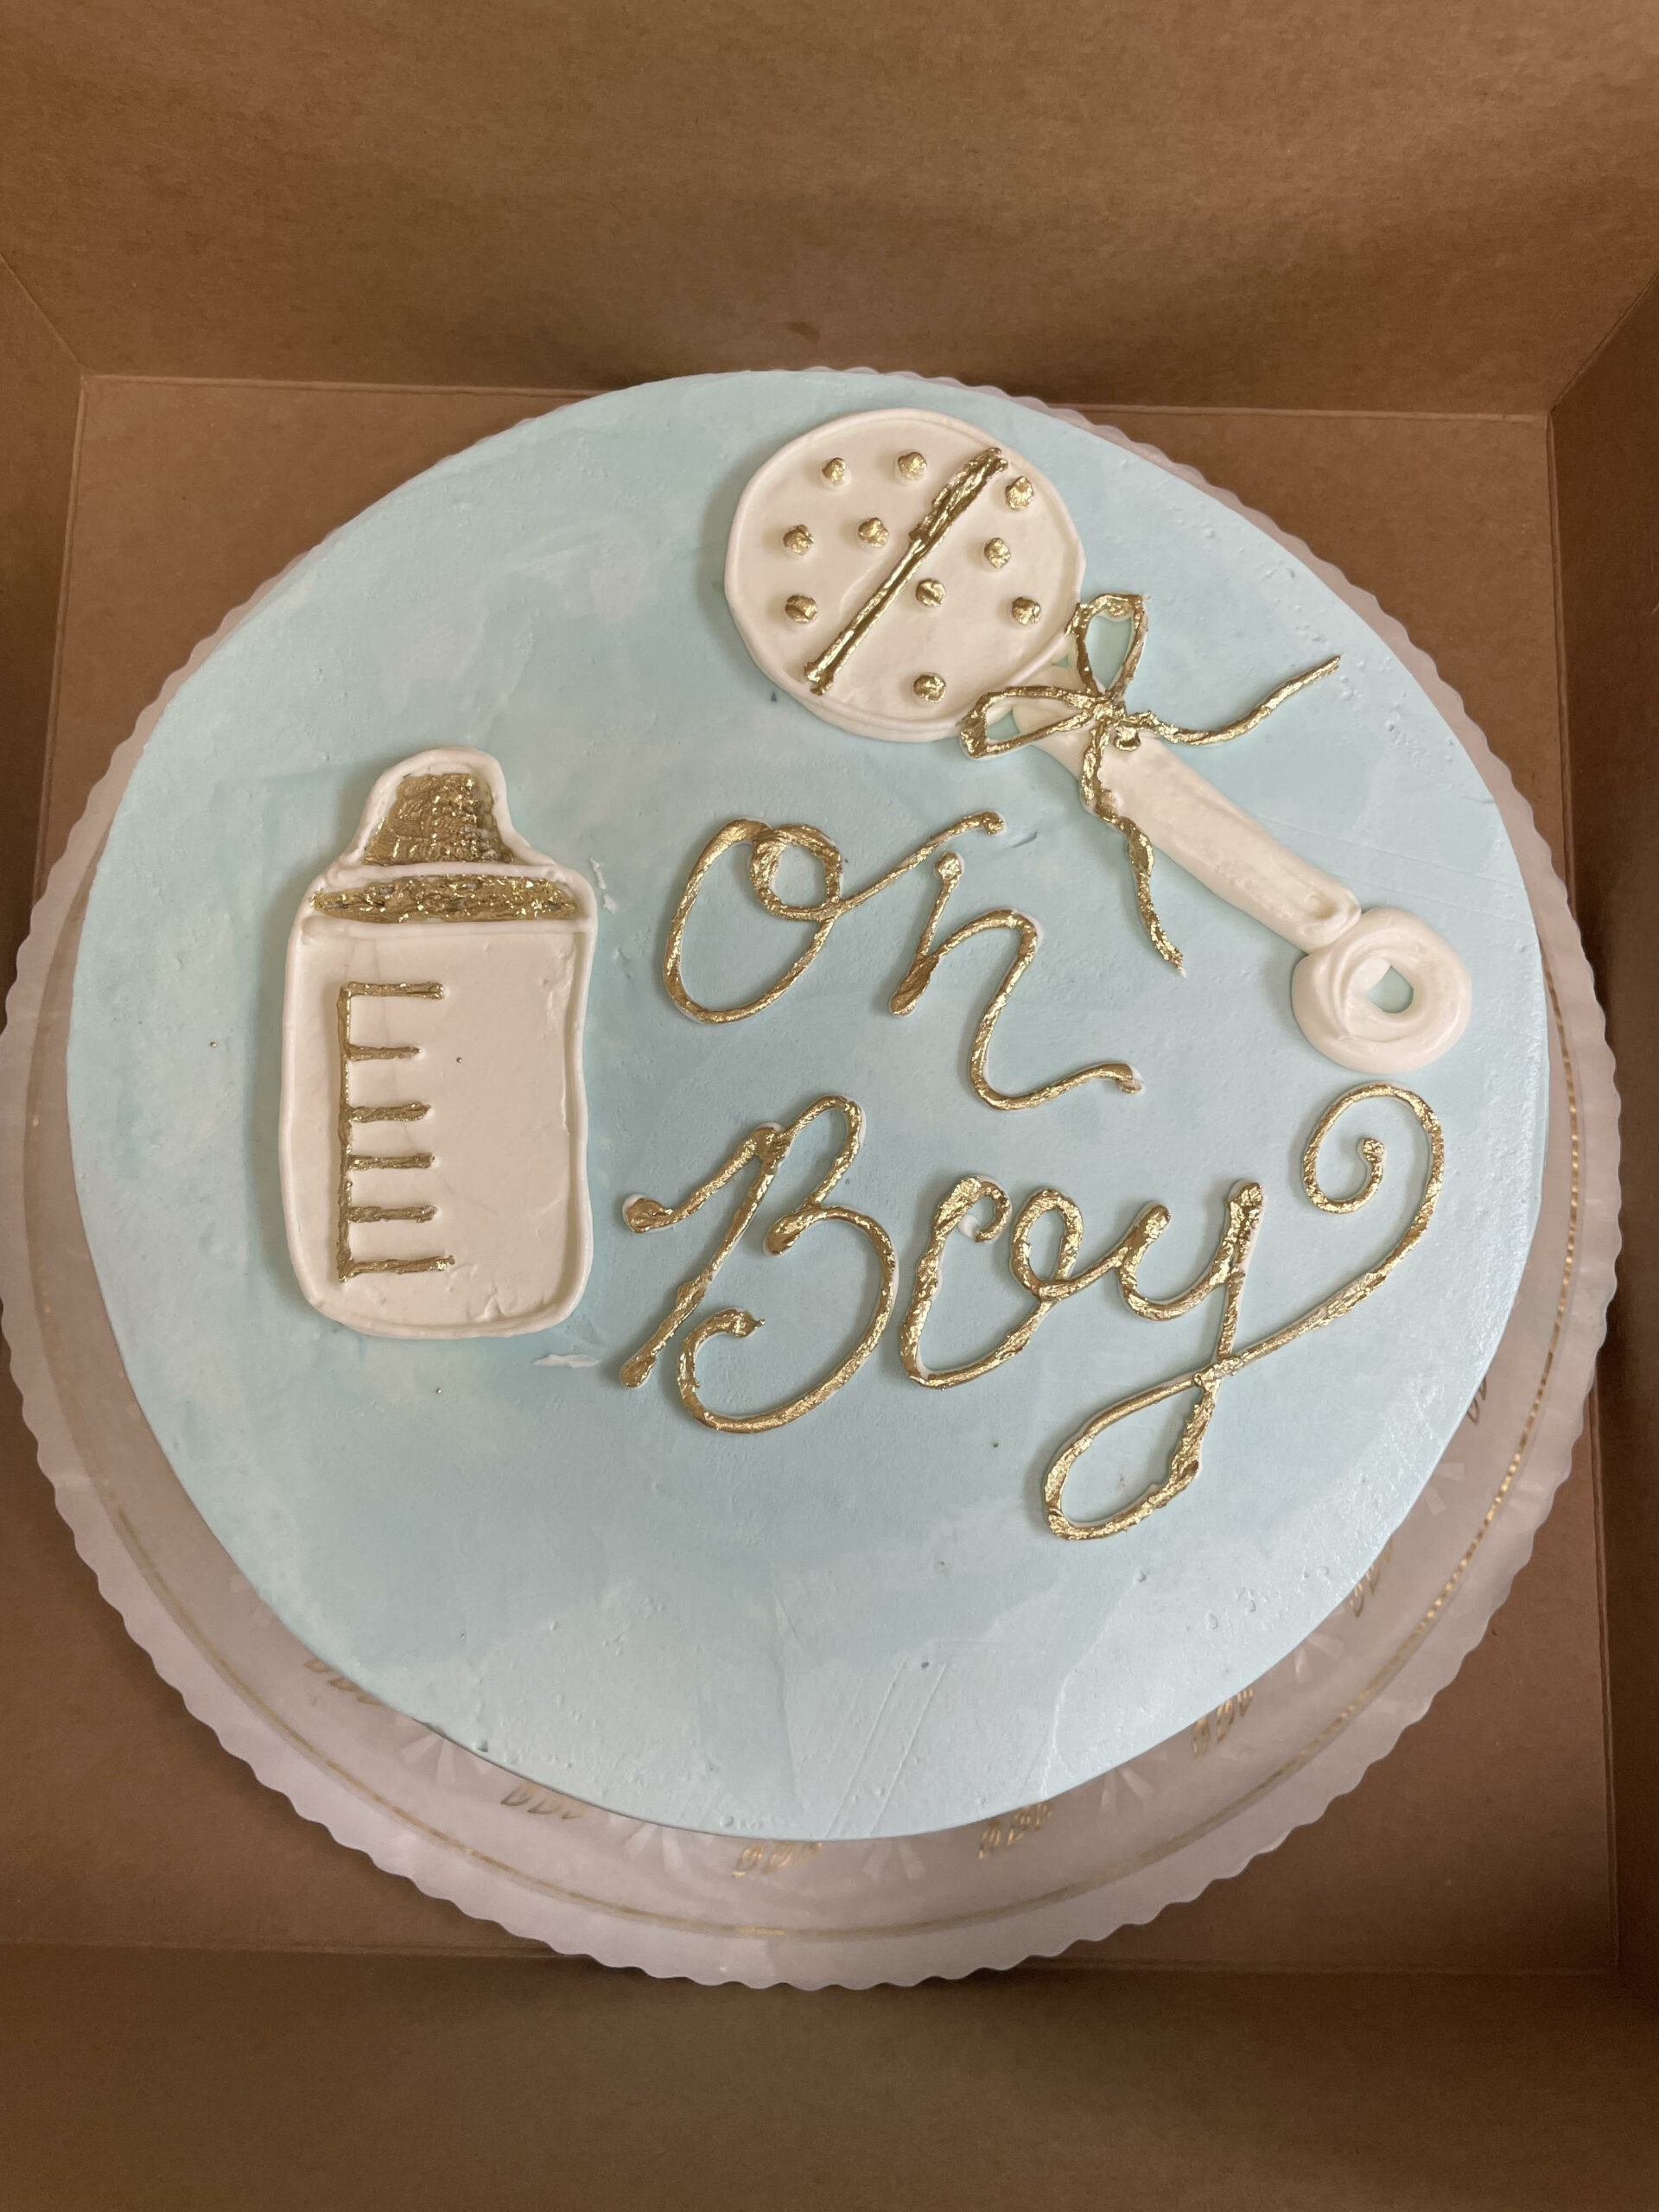 Personalized Dedication Cakes Near Me